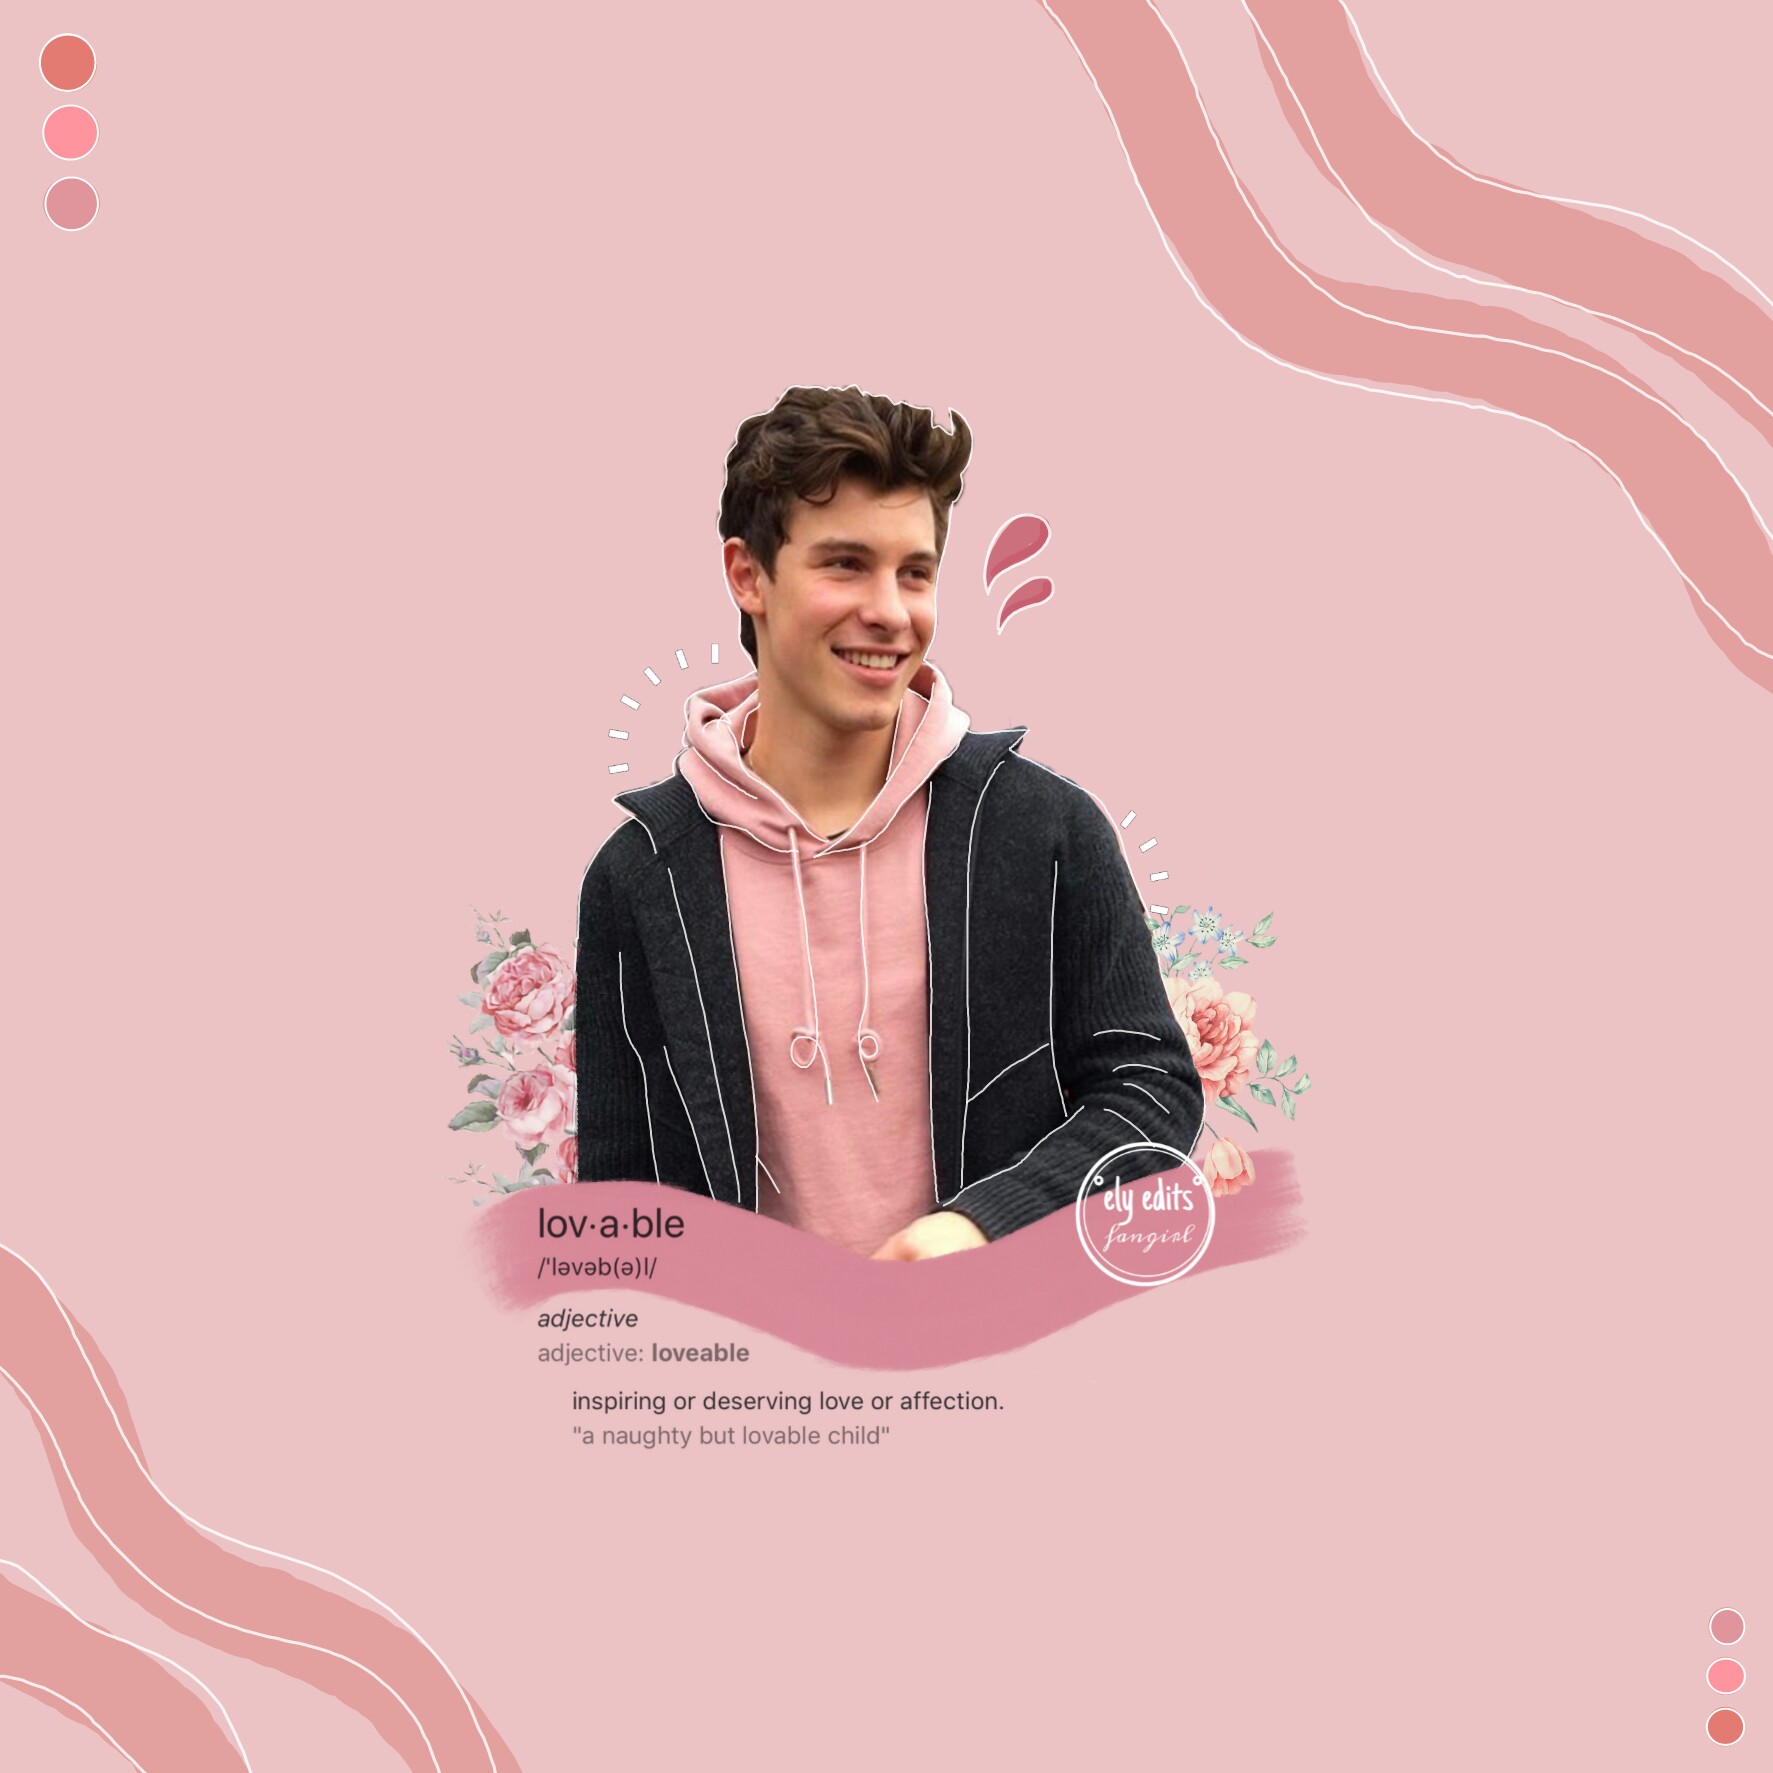 Shawn Mendes Mendesarmy Cute Pink Image By Ely Jack avery aesthetic by juli3569 on deviantart. shawn mendes mendesarmy cute pink image